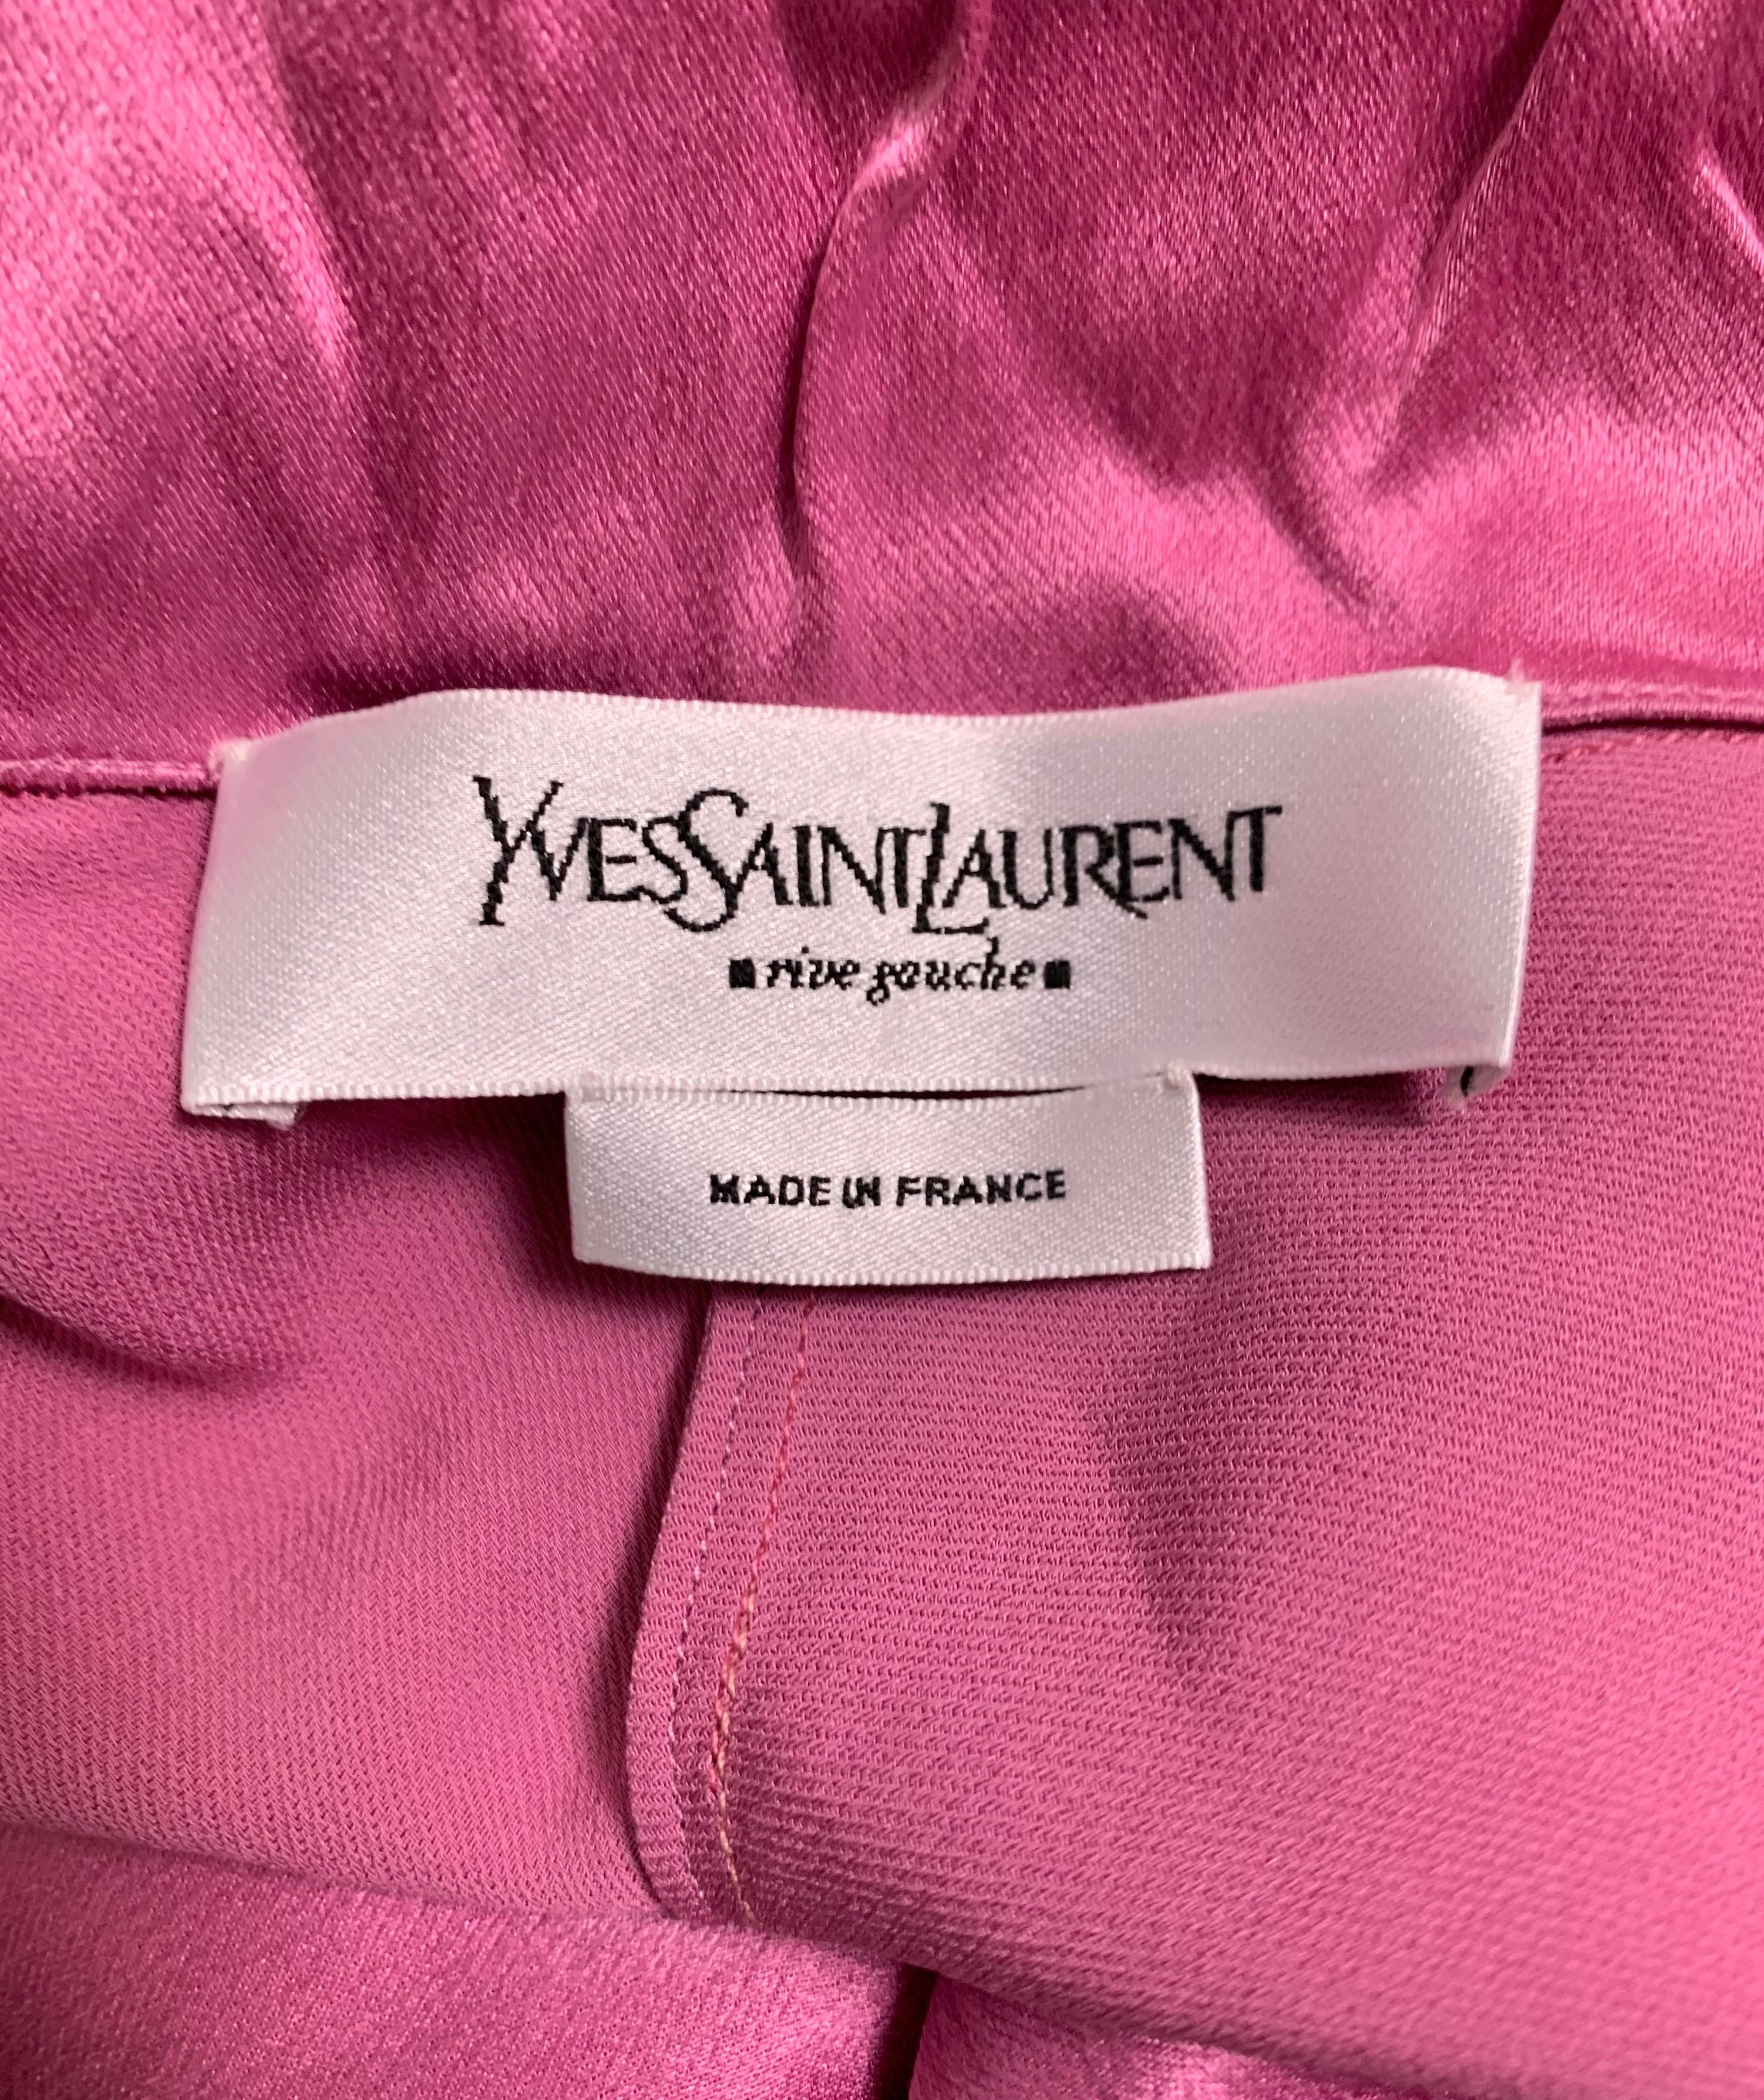 F/W 2001 Yves Saint Laurent Tom Ford Runway Pink Silk Plunging Dress In Good Condition In Yukon, OK